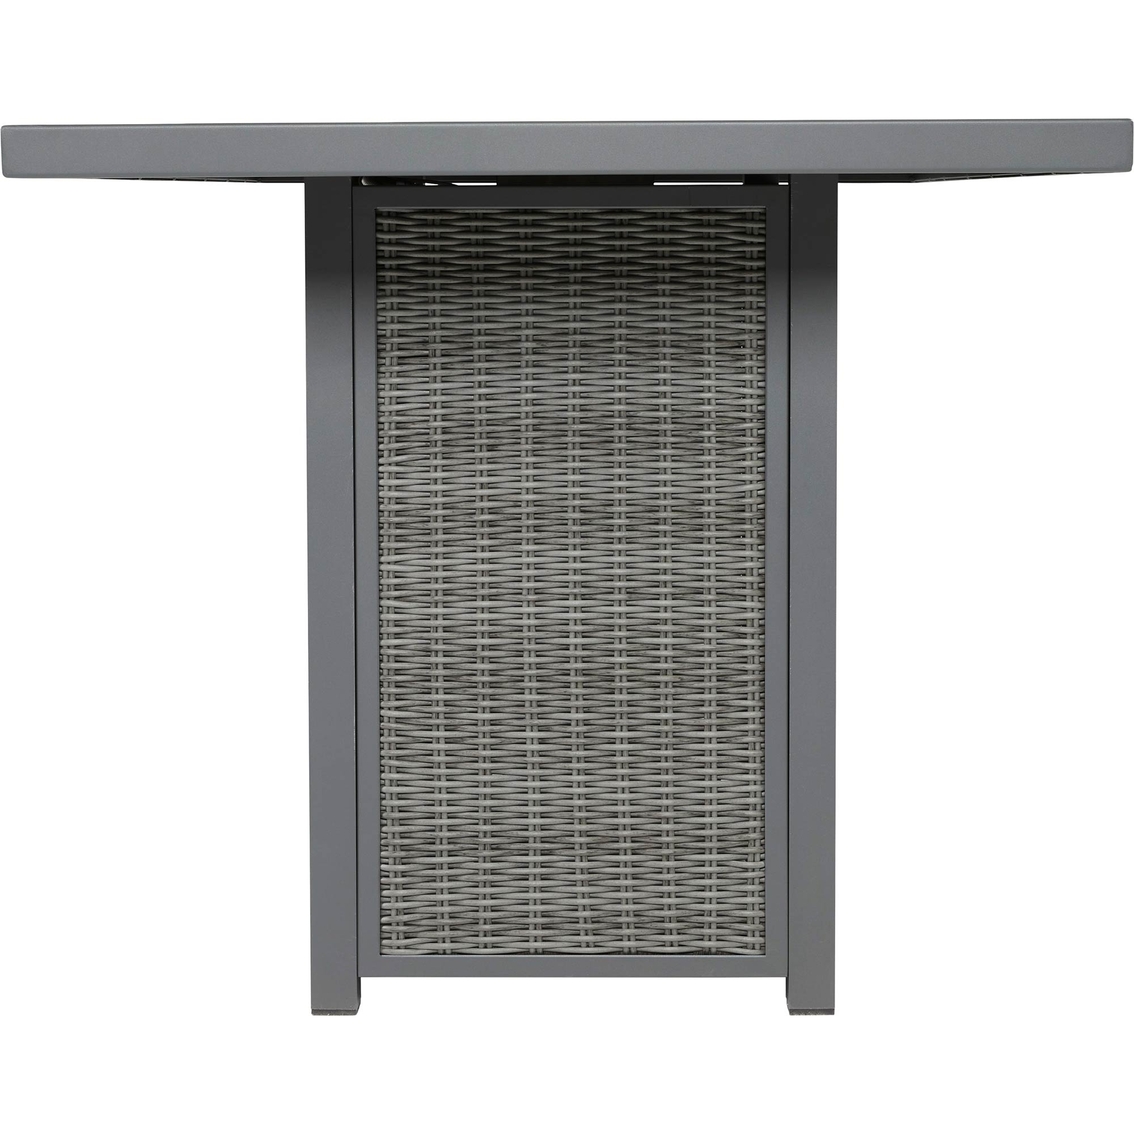 Signature Design by Ashley Palazzo Outdoor Bar Height Table with Fire Pit - Image 4 of 10